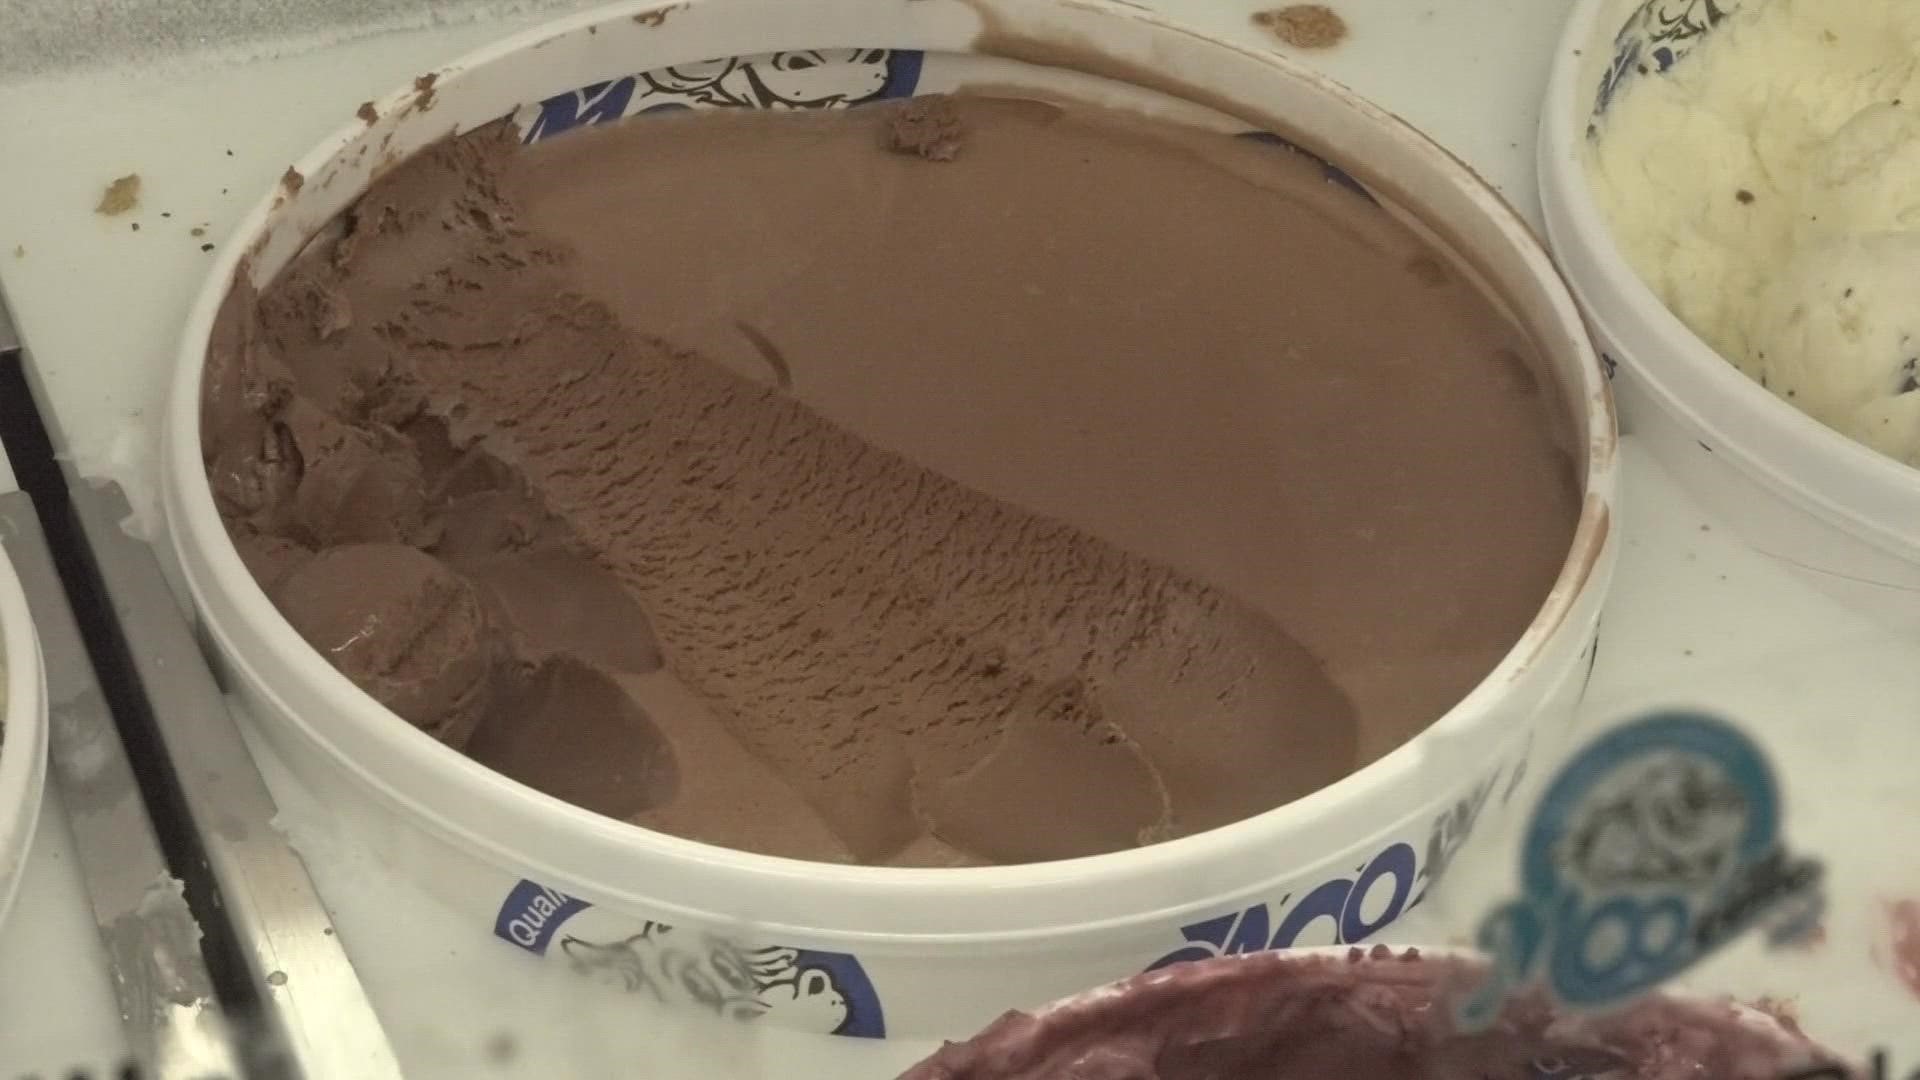 According to the North American Ice Cream Association, Nashville, Michigan-based MOO-ville Creamery has the best chocolate ice cream in the United States.